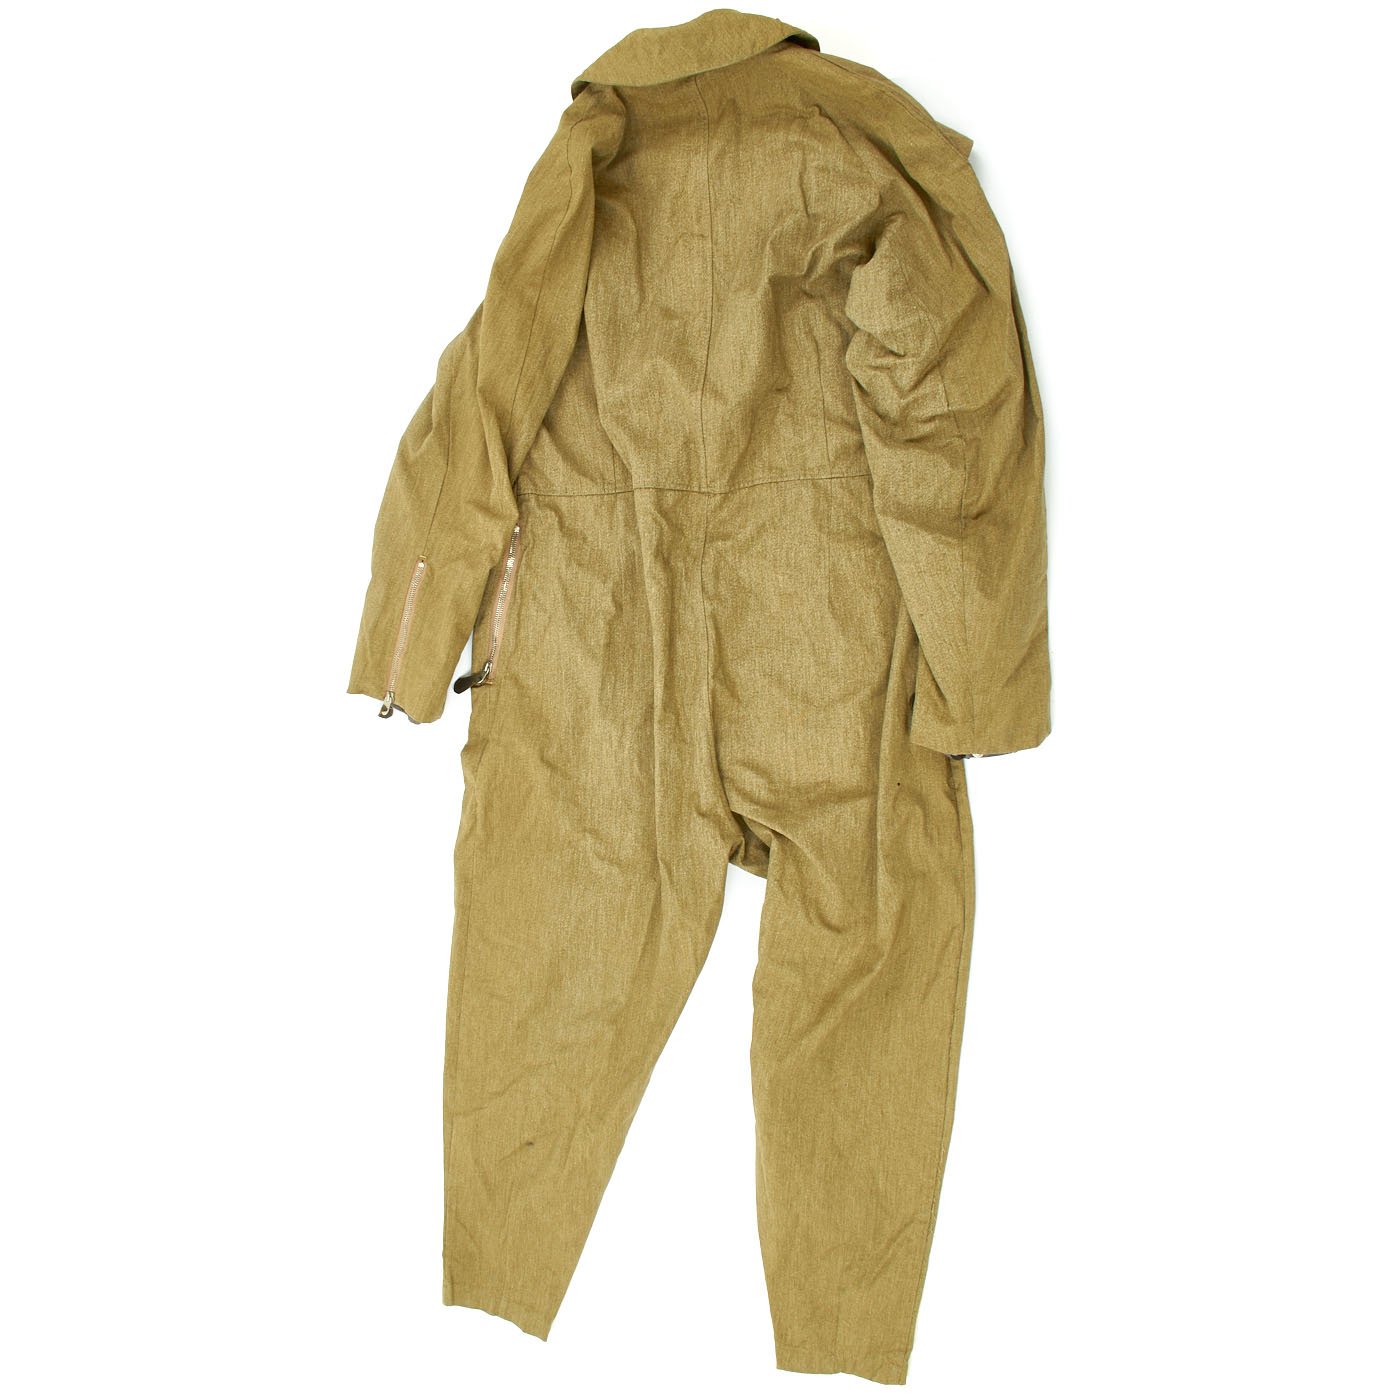 Original German WWII Luftwaffe Summer Flying Suit Named to Knight's Cr ...